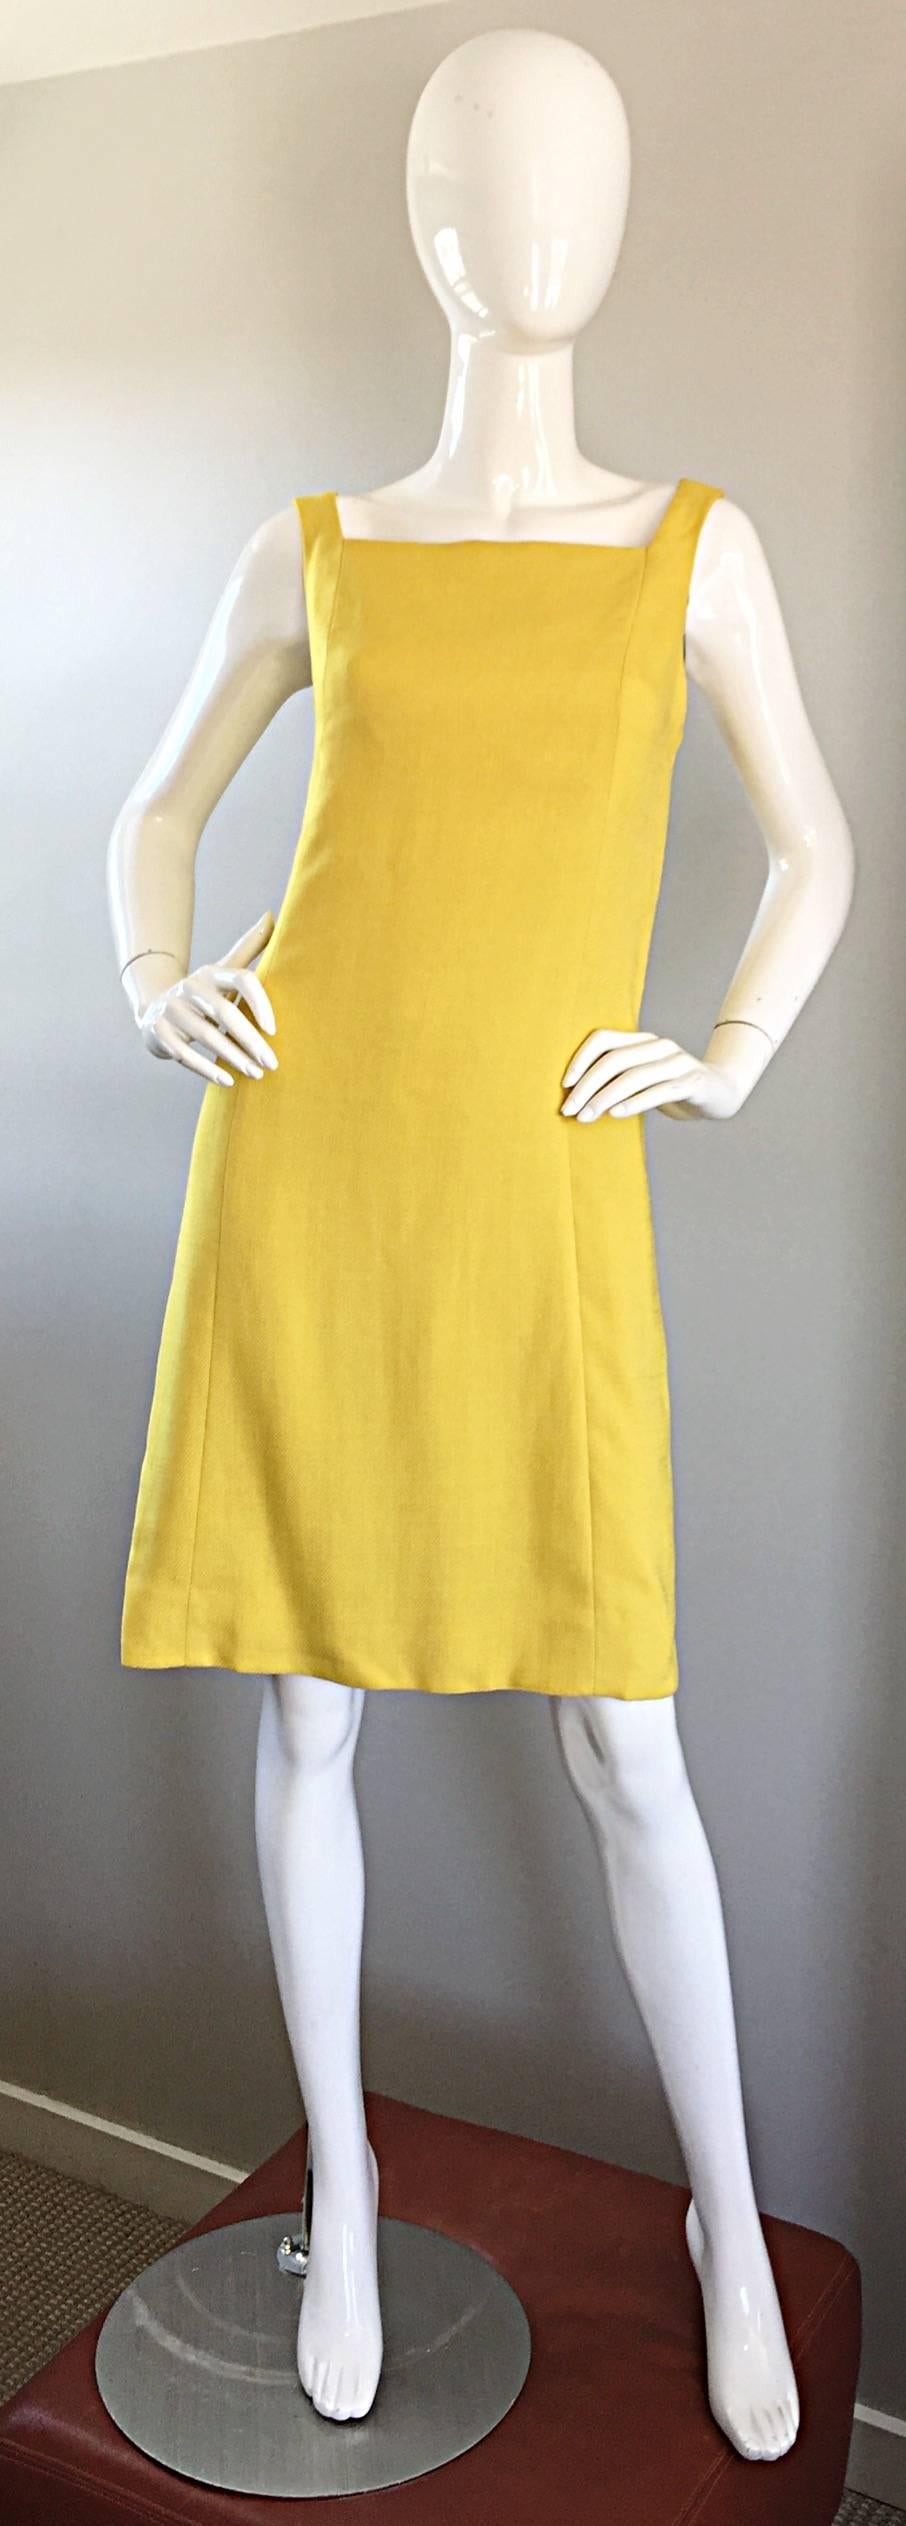 Chic 1960s PAUL STANLEY New York canary yellow linen shift dress! Luxurious Irish linen that is partially lined. Flattering A-Line / Twiggy shape works for a variety of body types. Two buttons at the back sleeves add just the right amount of detail.